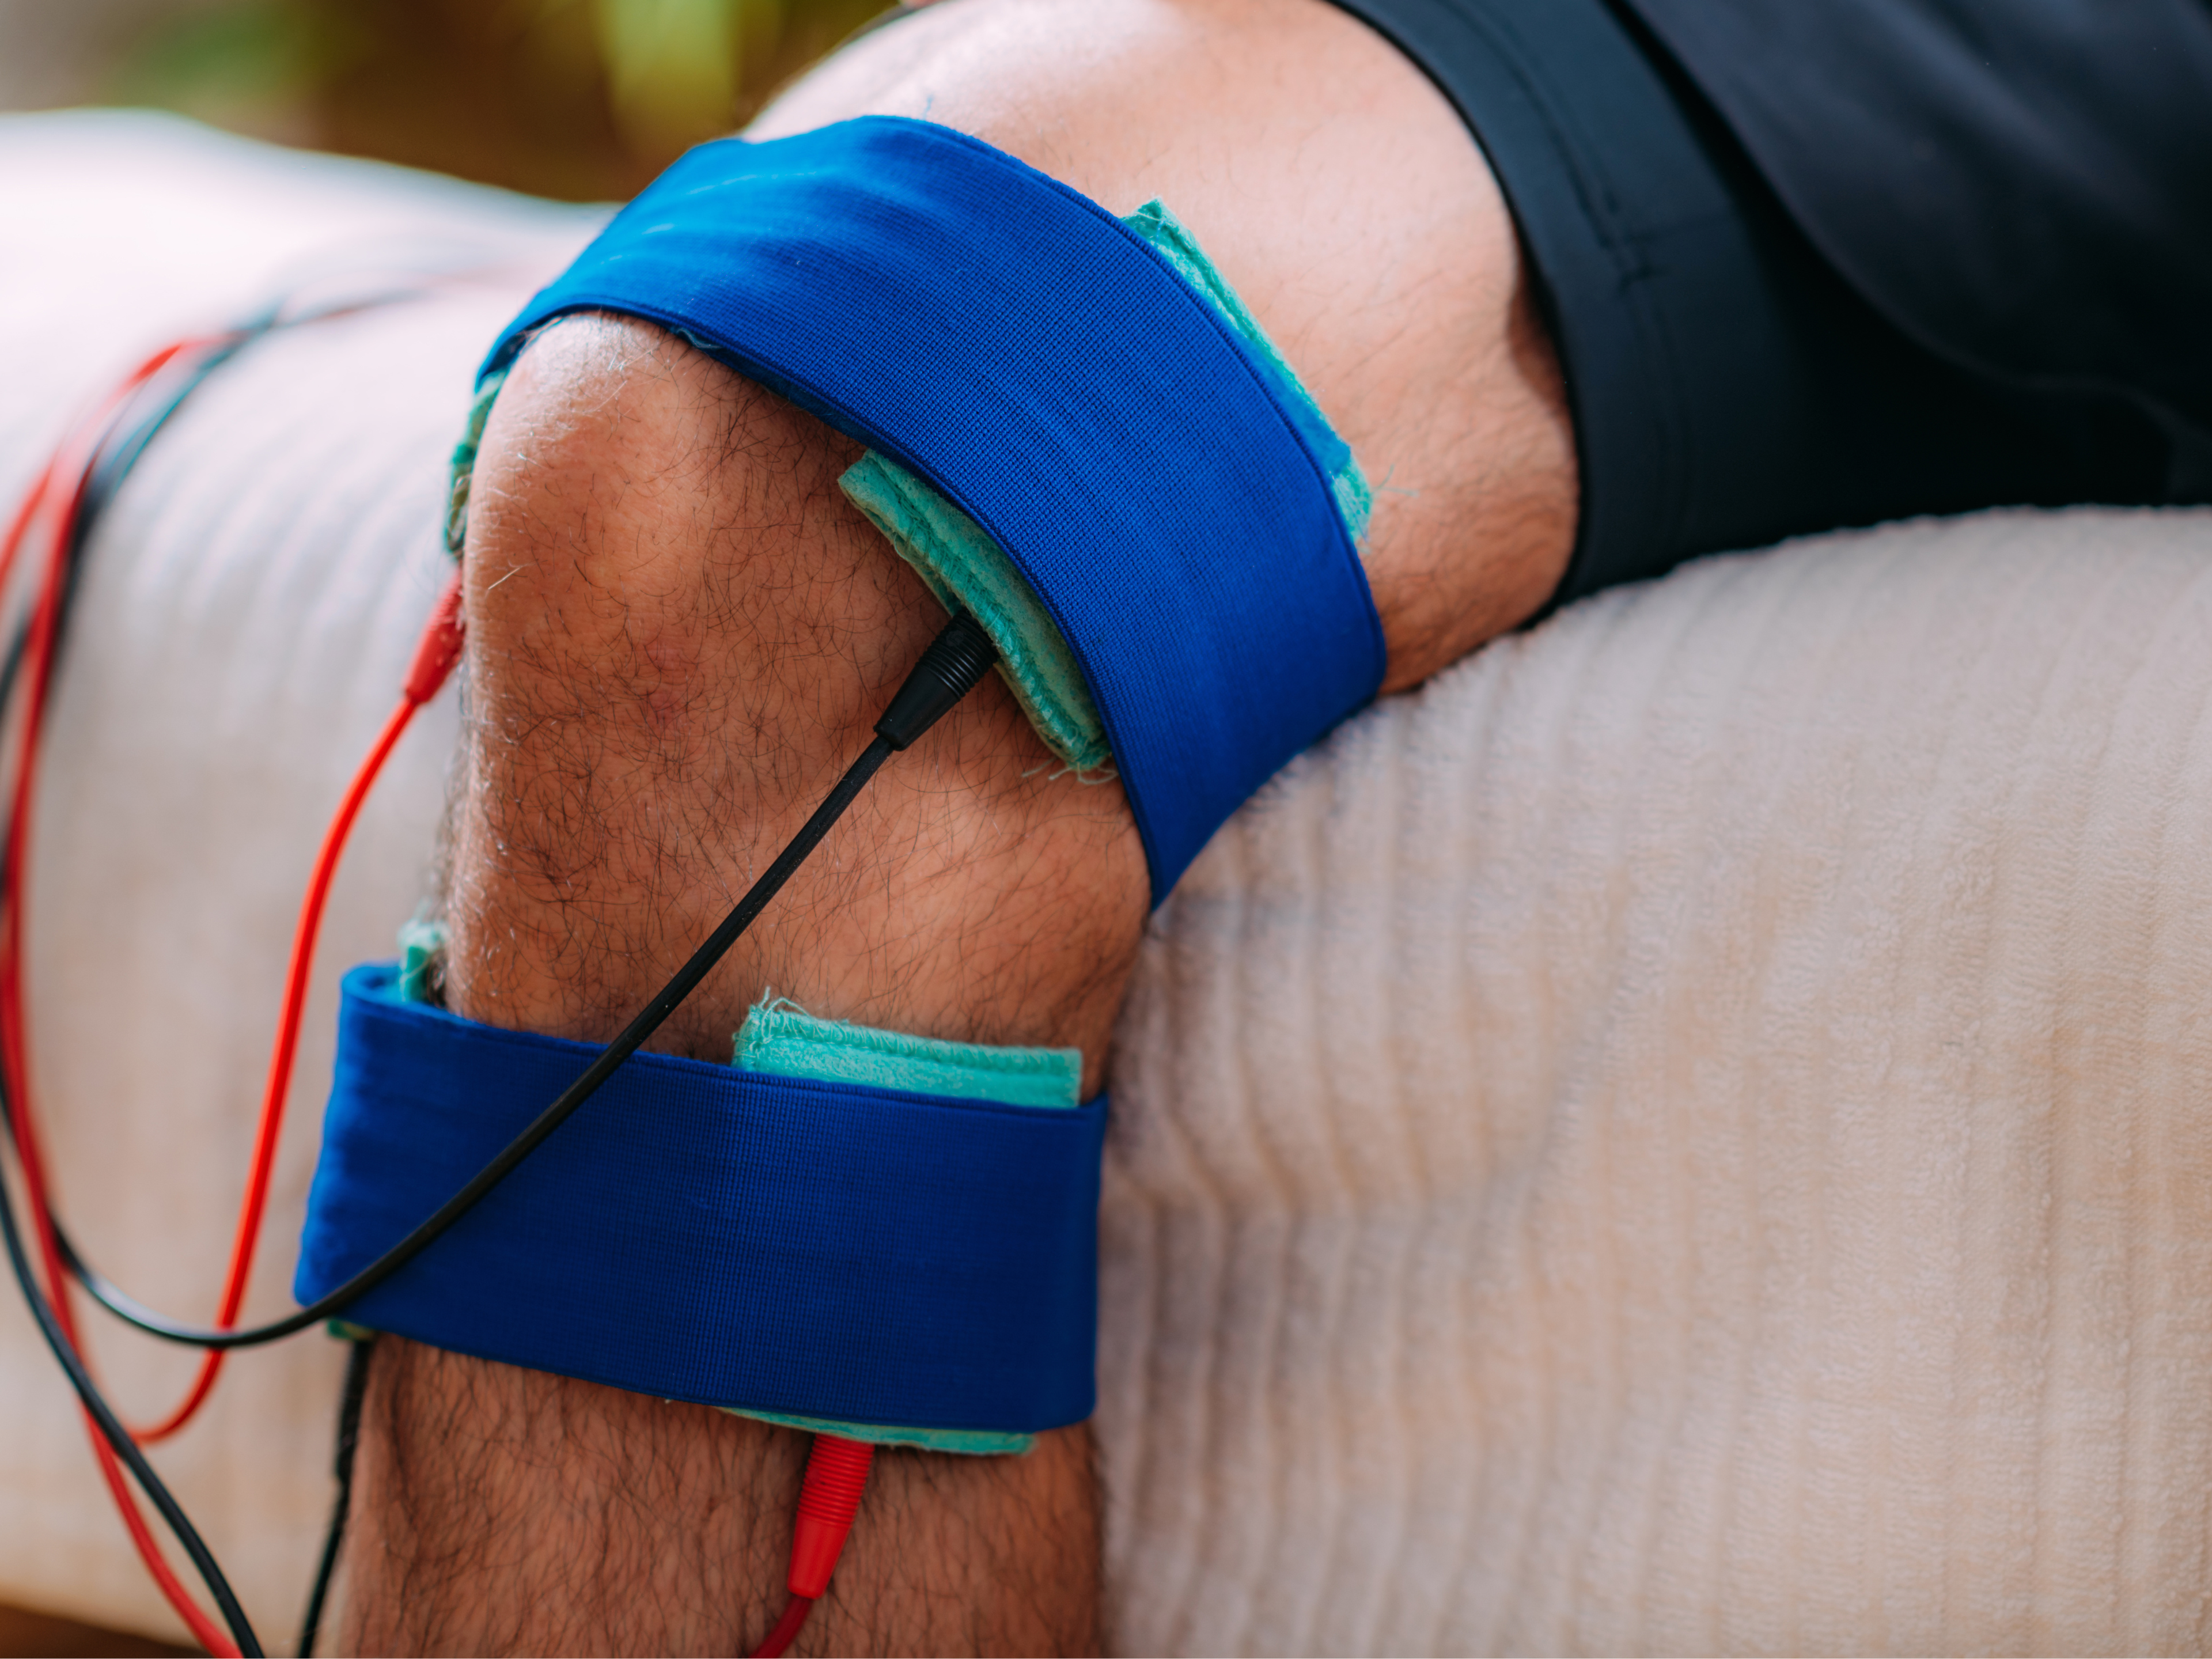 Electrotherapy does not seem effective for treating patellar tendonitis pain.